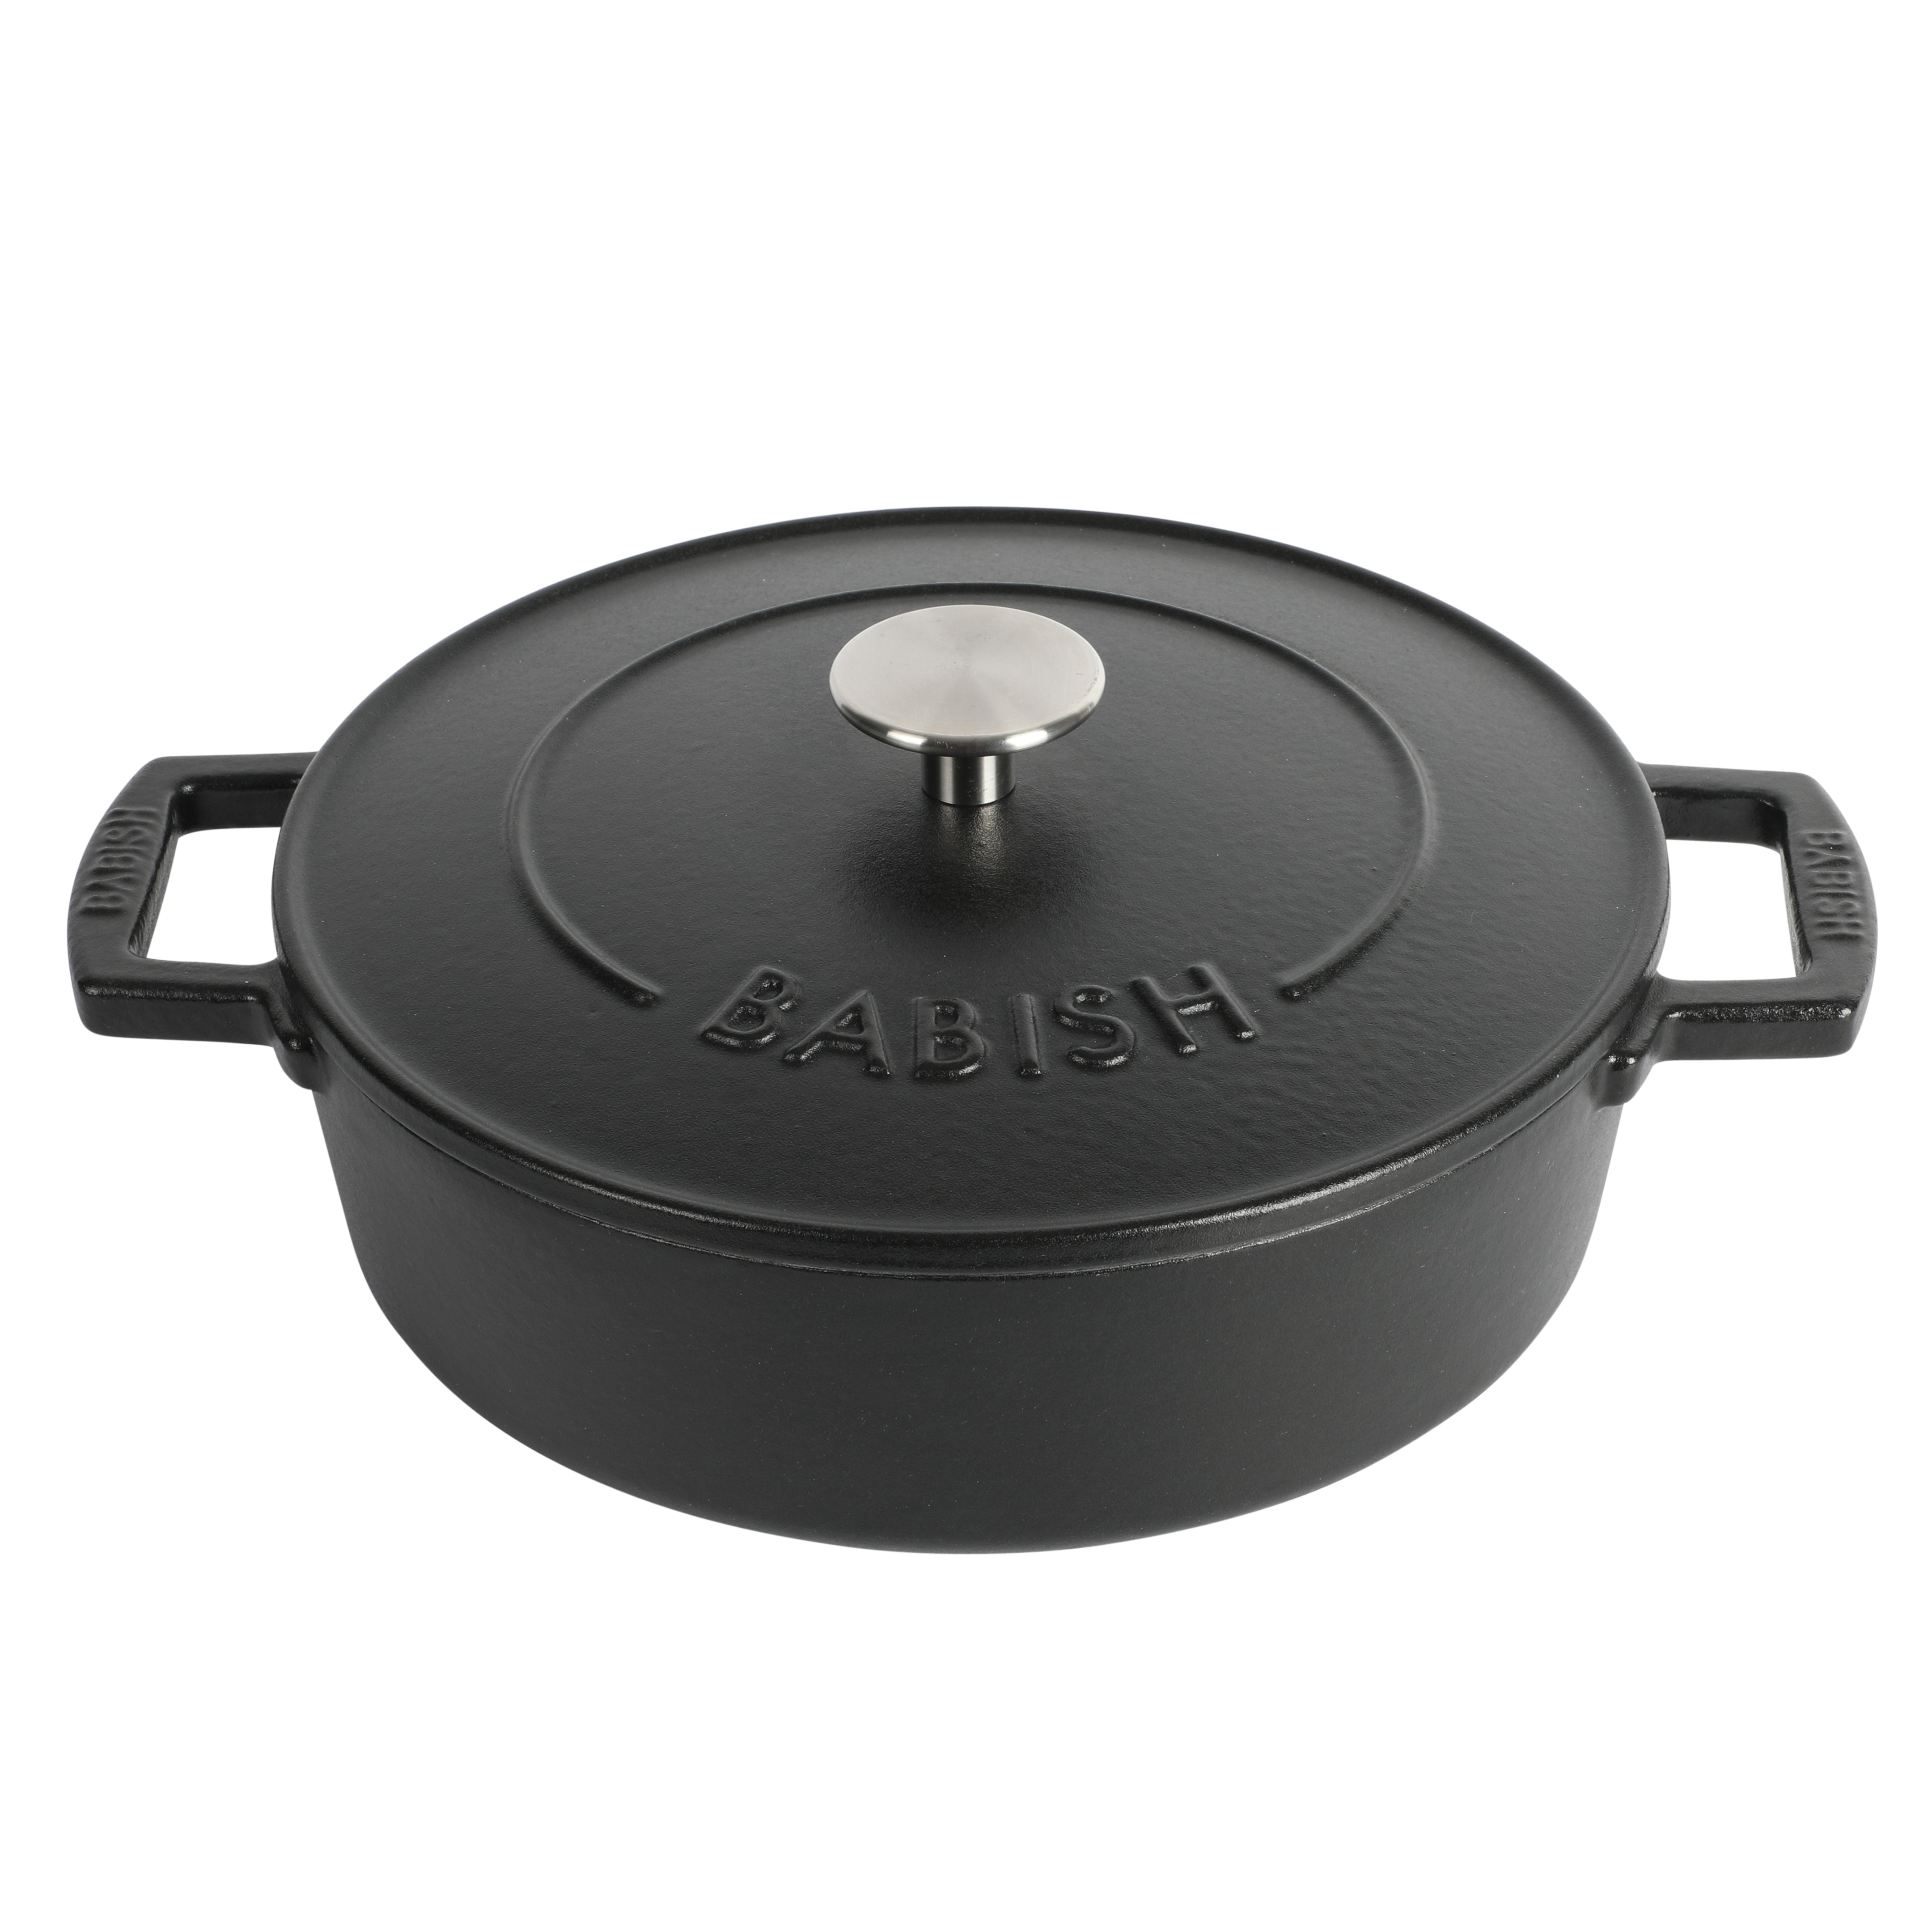 3-Quart Cast Iron Enamel Covered Dutch Oven with Lid